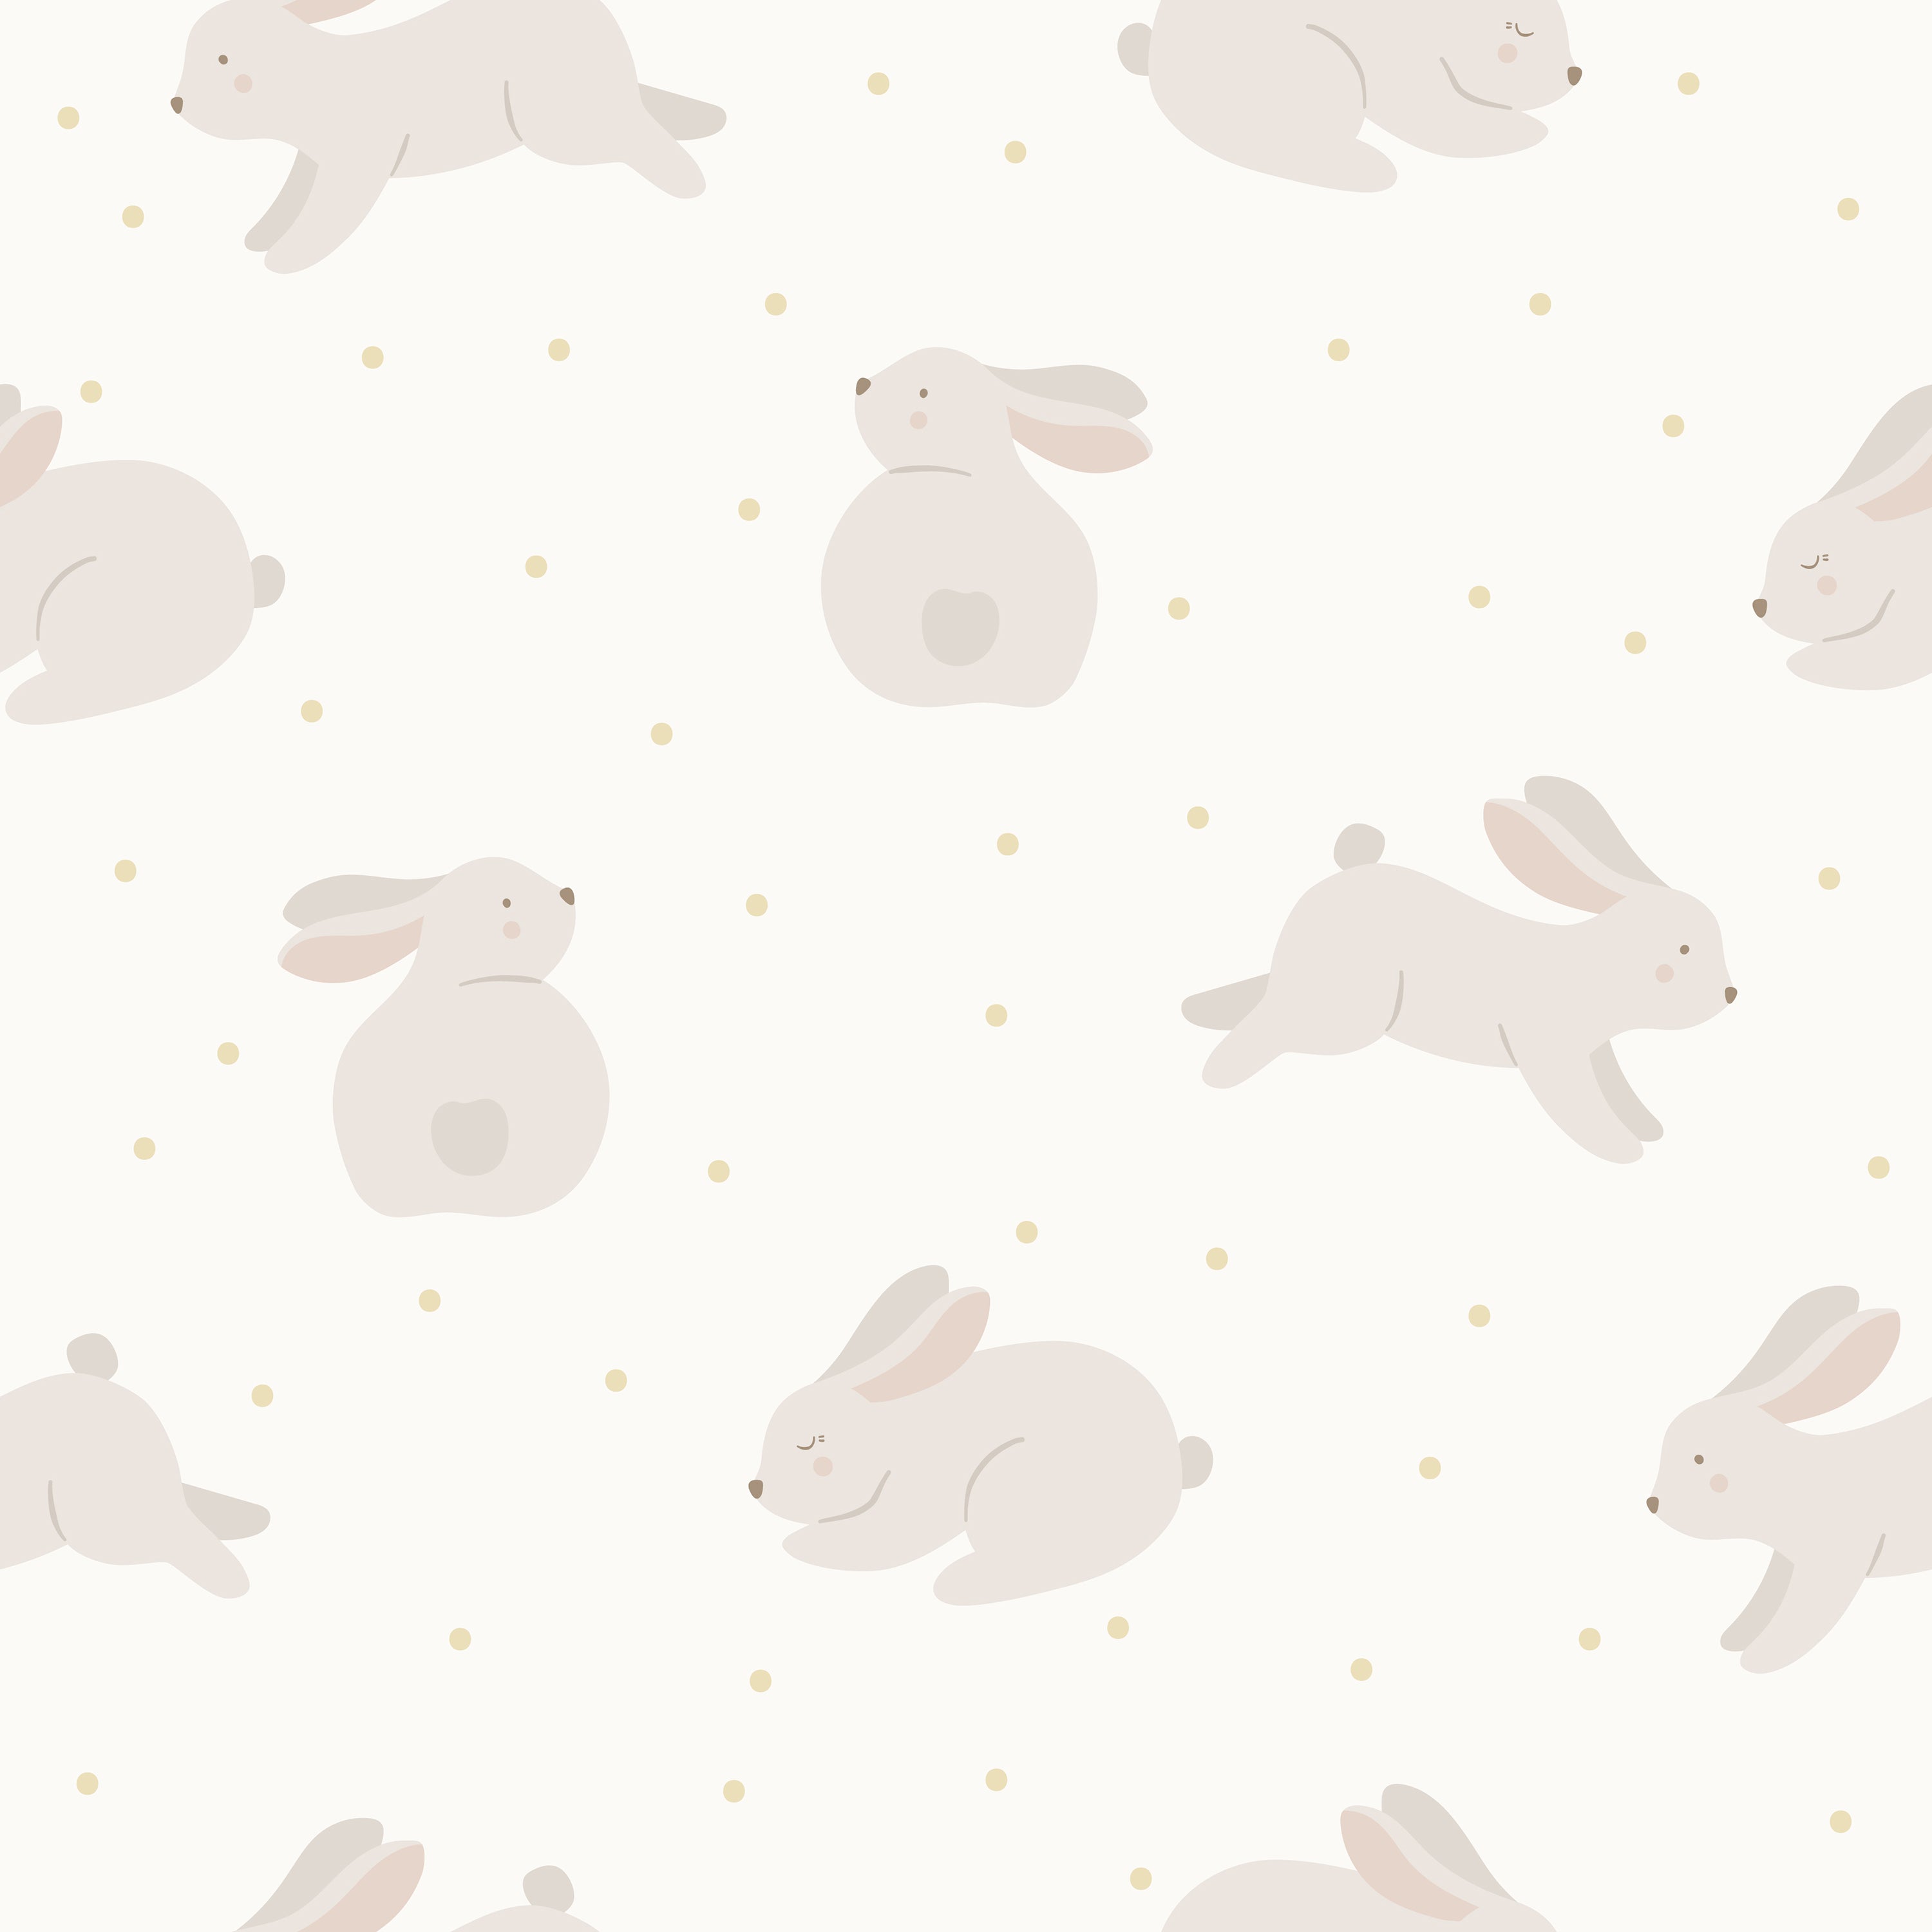 Soft and serene 'Nursery Bunny Wallpaper' featuring gentle illustrations of beige bunnies in various poses with golden dots on a light background, creating a calming atmosphere perfect for a baby's nursery.